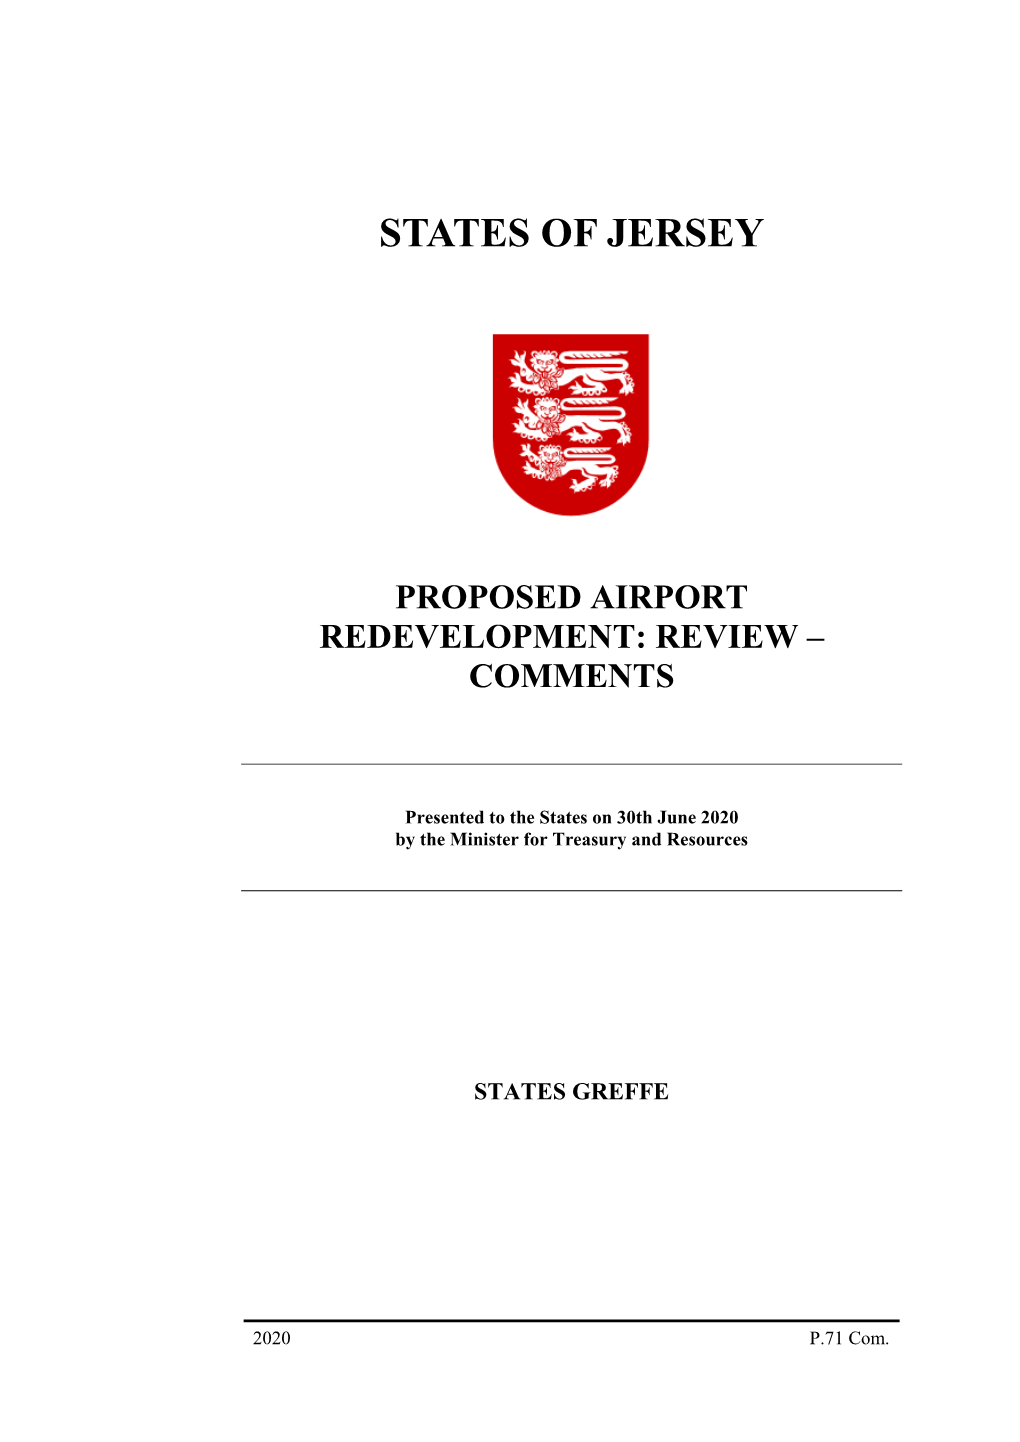 Proposed Airport Redevelopment: Review – Comments